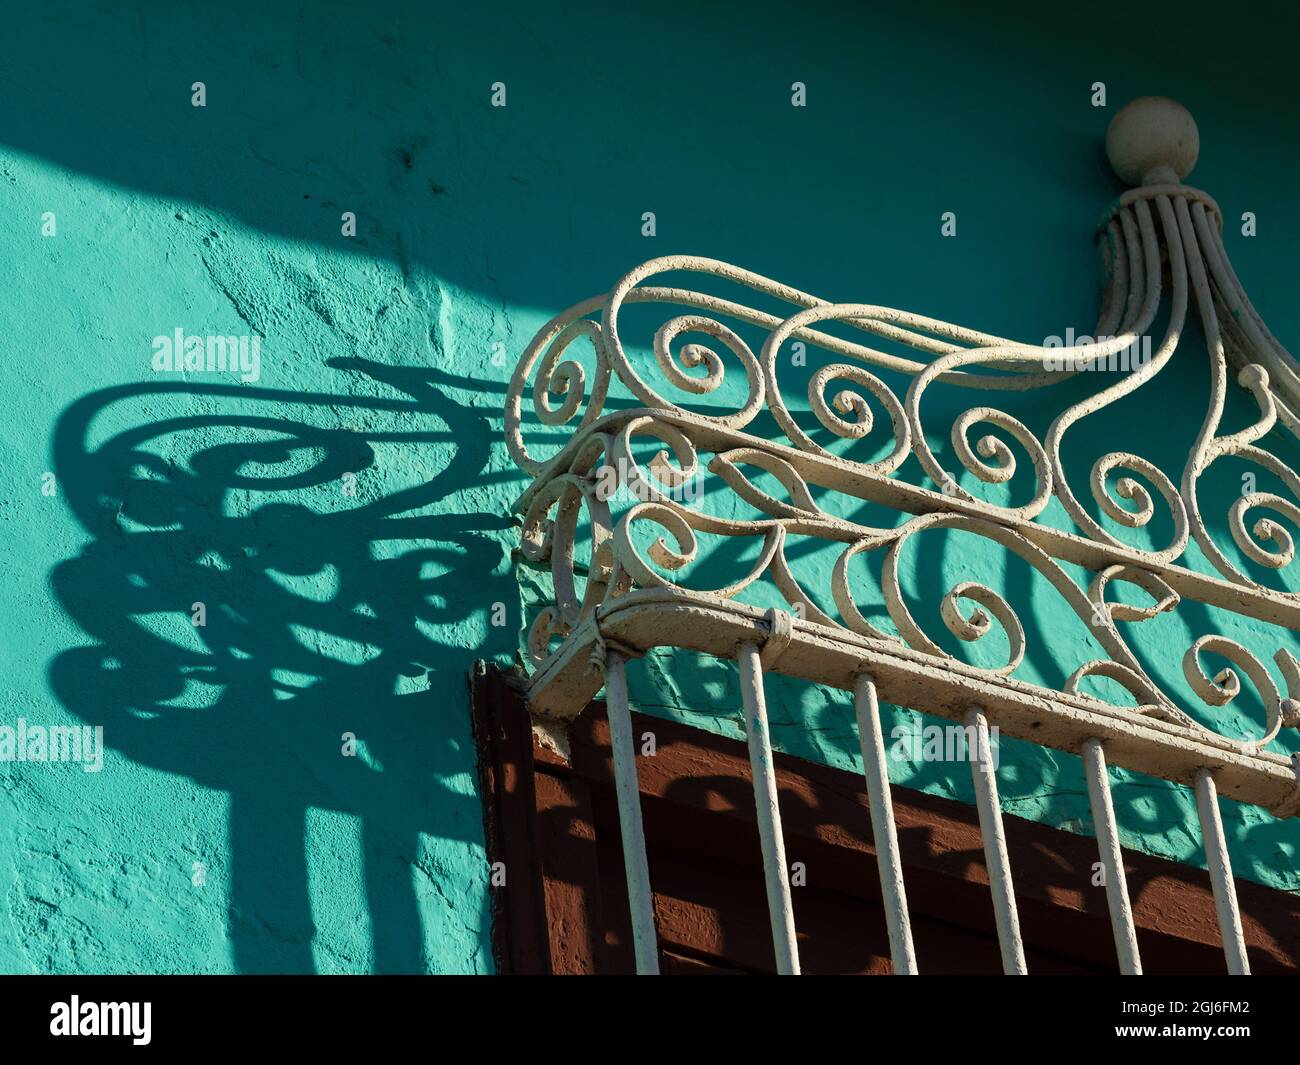 Cuba, Trinidad. Wrought-iron window grill and shadow on turquoise wall. Stock Photo